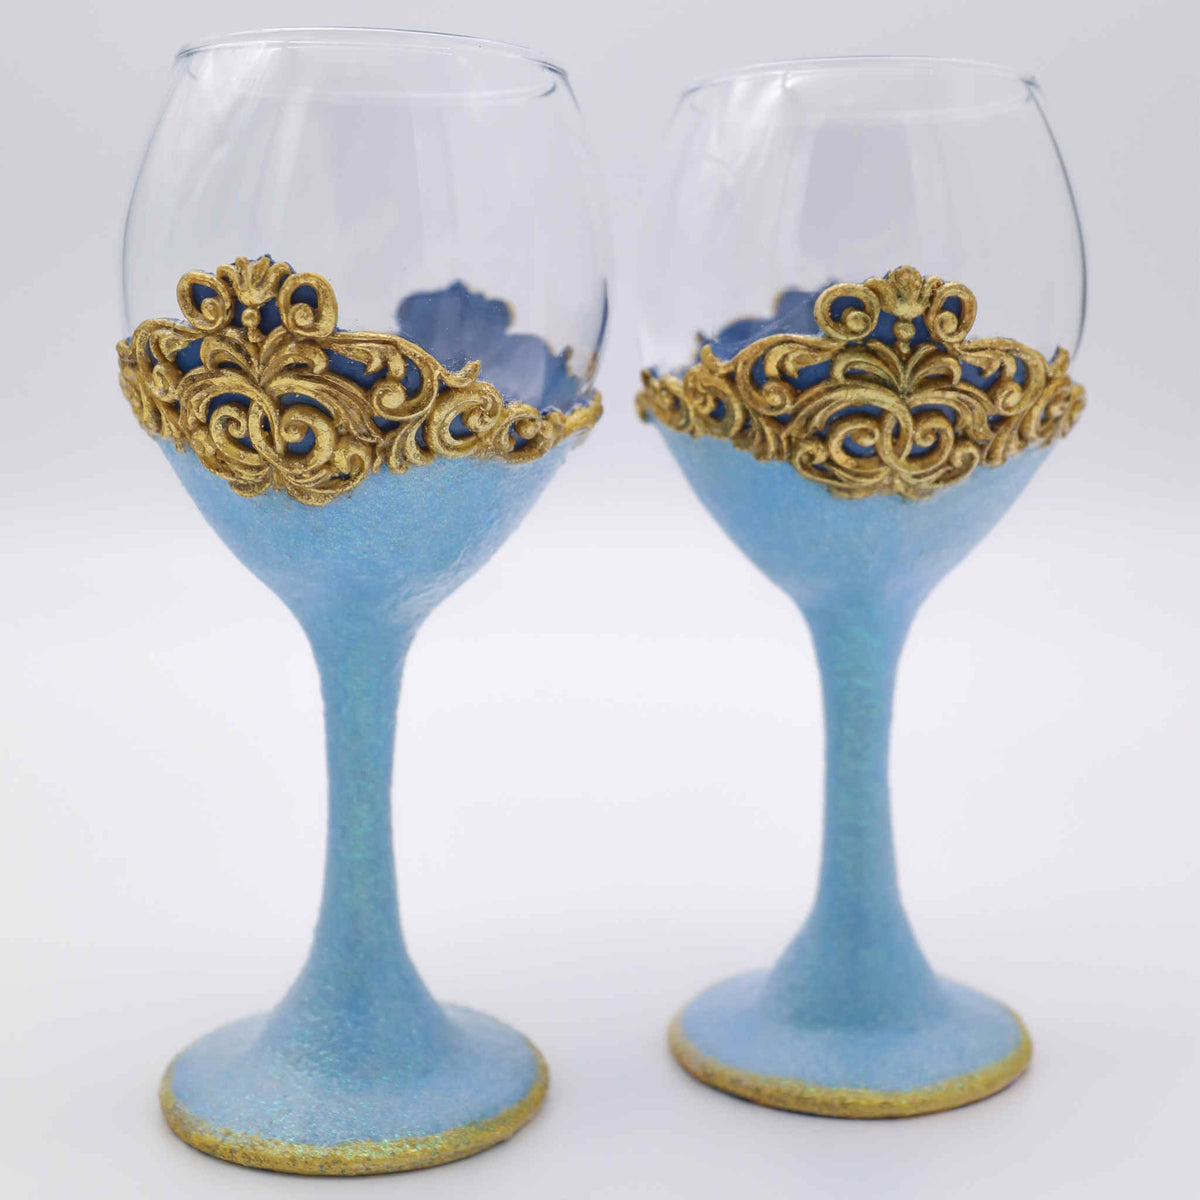 Add a touch of fairytale splendor and enchanted romance with our steamware set. It is the perfect way to add a little sparkle and a special touch of color. Makes a wonderful gift for engagements, showers, weddings and anniversaries. Each wine glass is hand-scuplted with polymer clay blue base and stem that shimmers with a touch of glitter. A gold leaf accents the bottom edge and &quot;lace&quot; top.